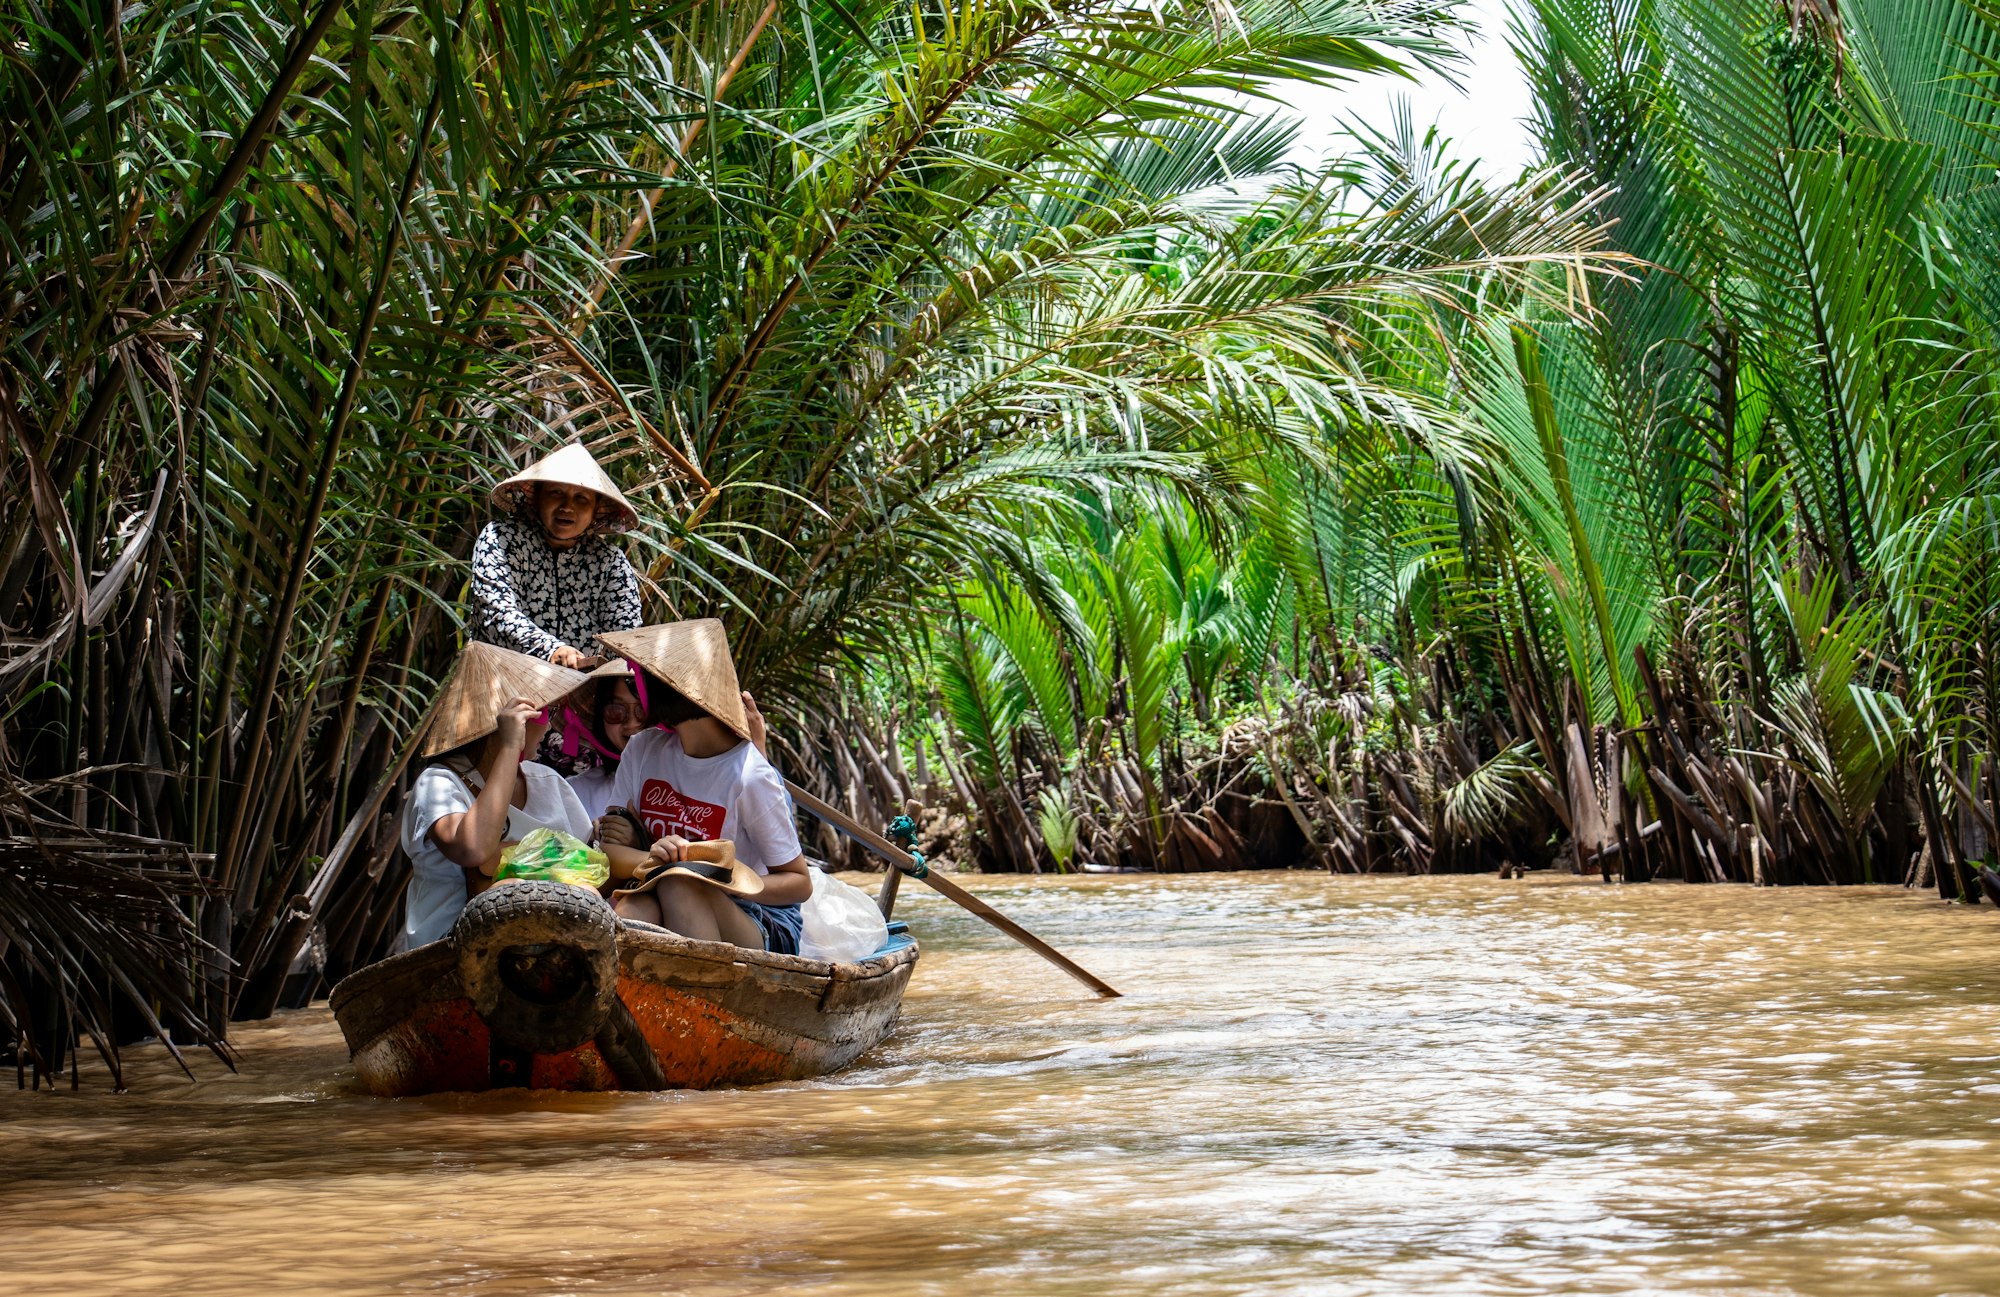 Cruise through Mekong River Delta, which is 10. biggest river in the world. You can get there from Ho Chi Minh city in about 1.5 hour and enjoy cruise like this